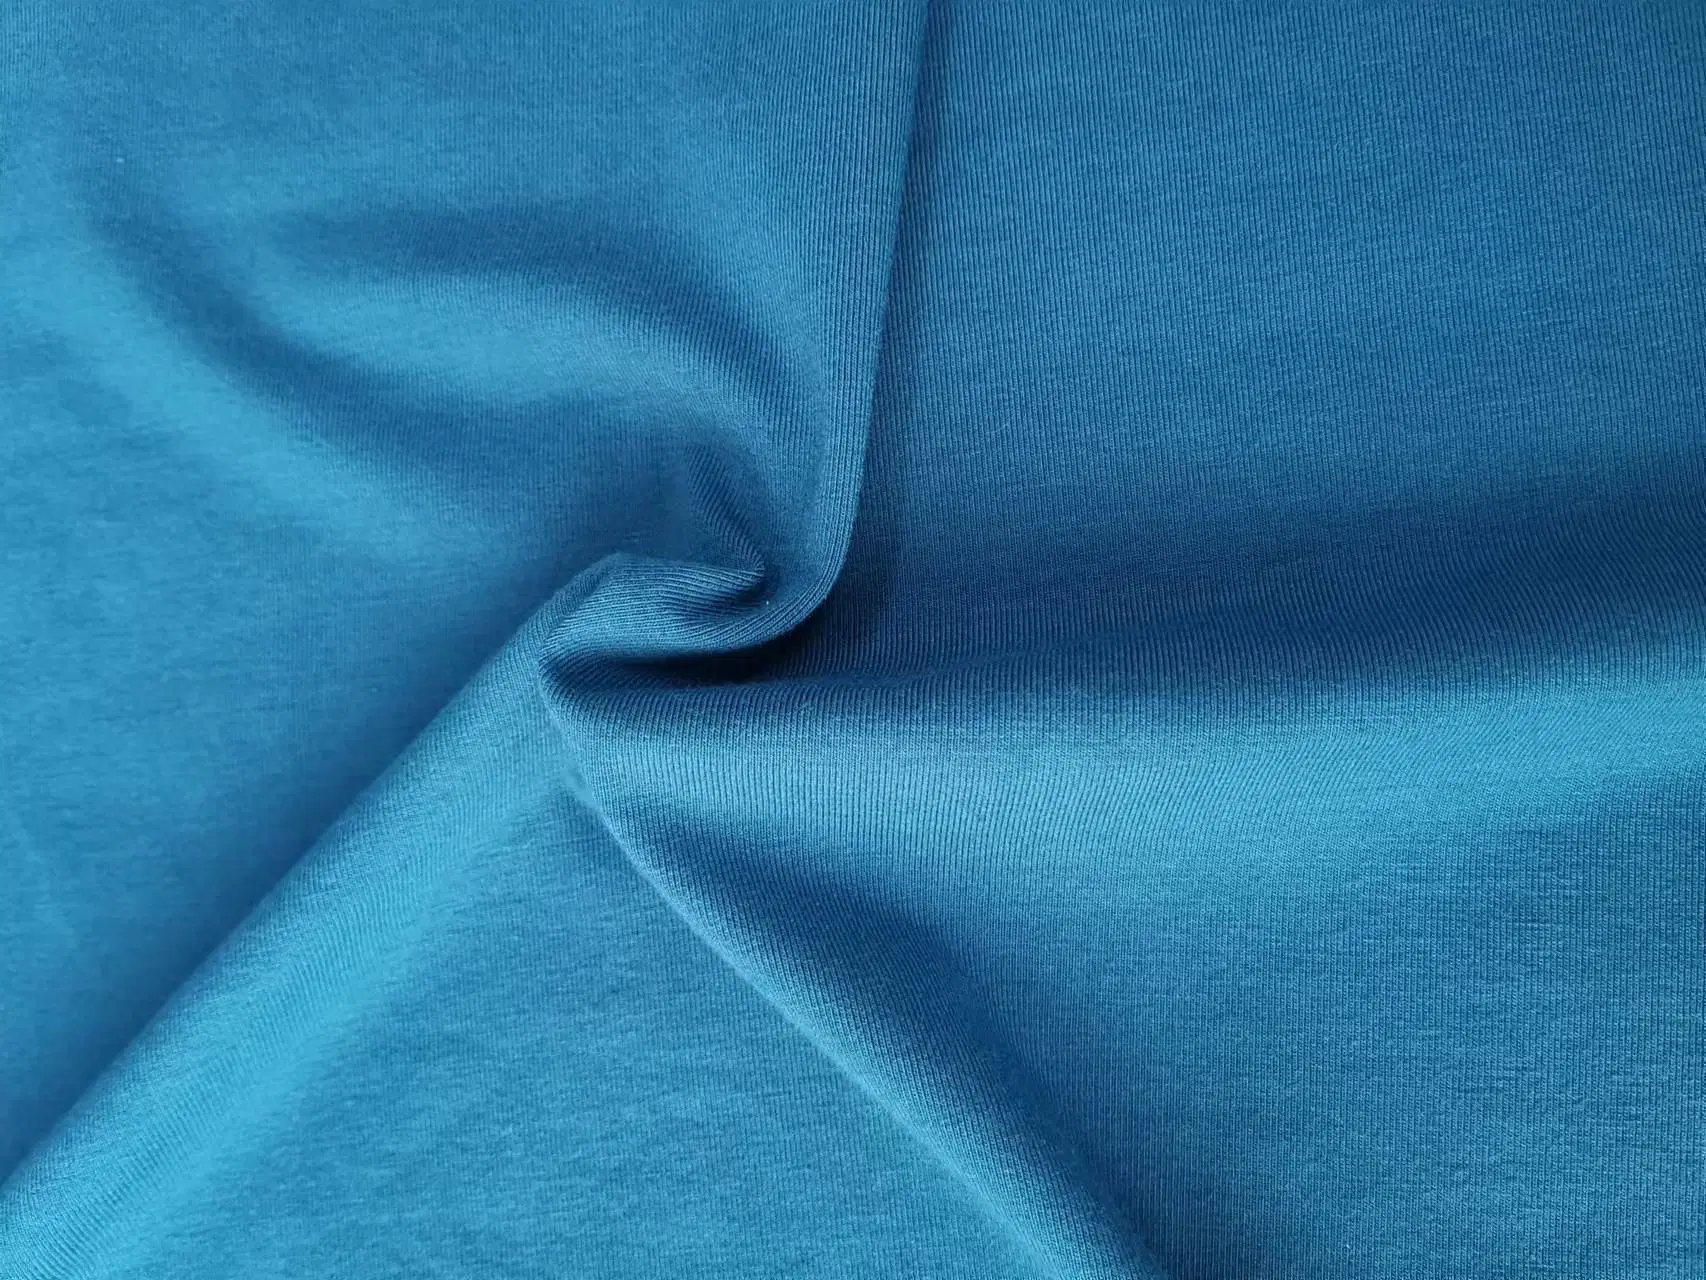 Wholesale/Supplier Single Jersey 65% Polyester 35% Cotton with Spandex Tc Knitting Fabric for Sportswear